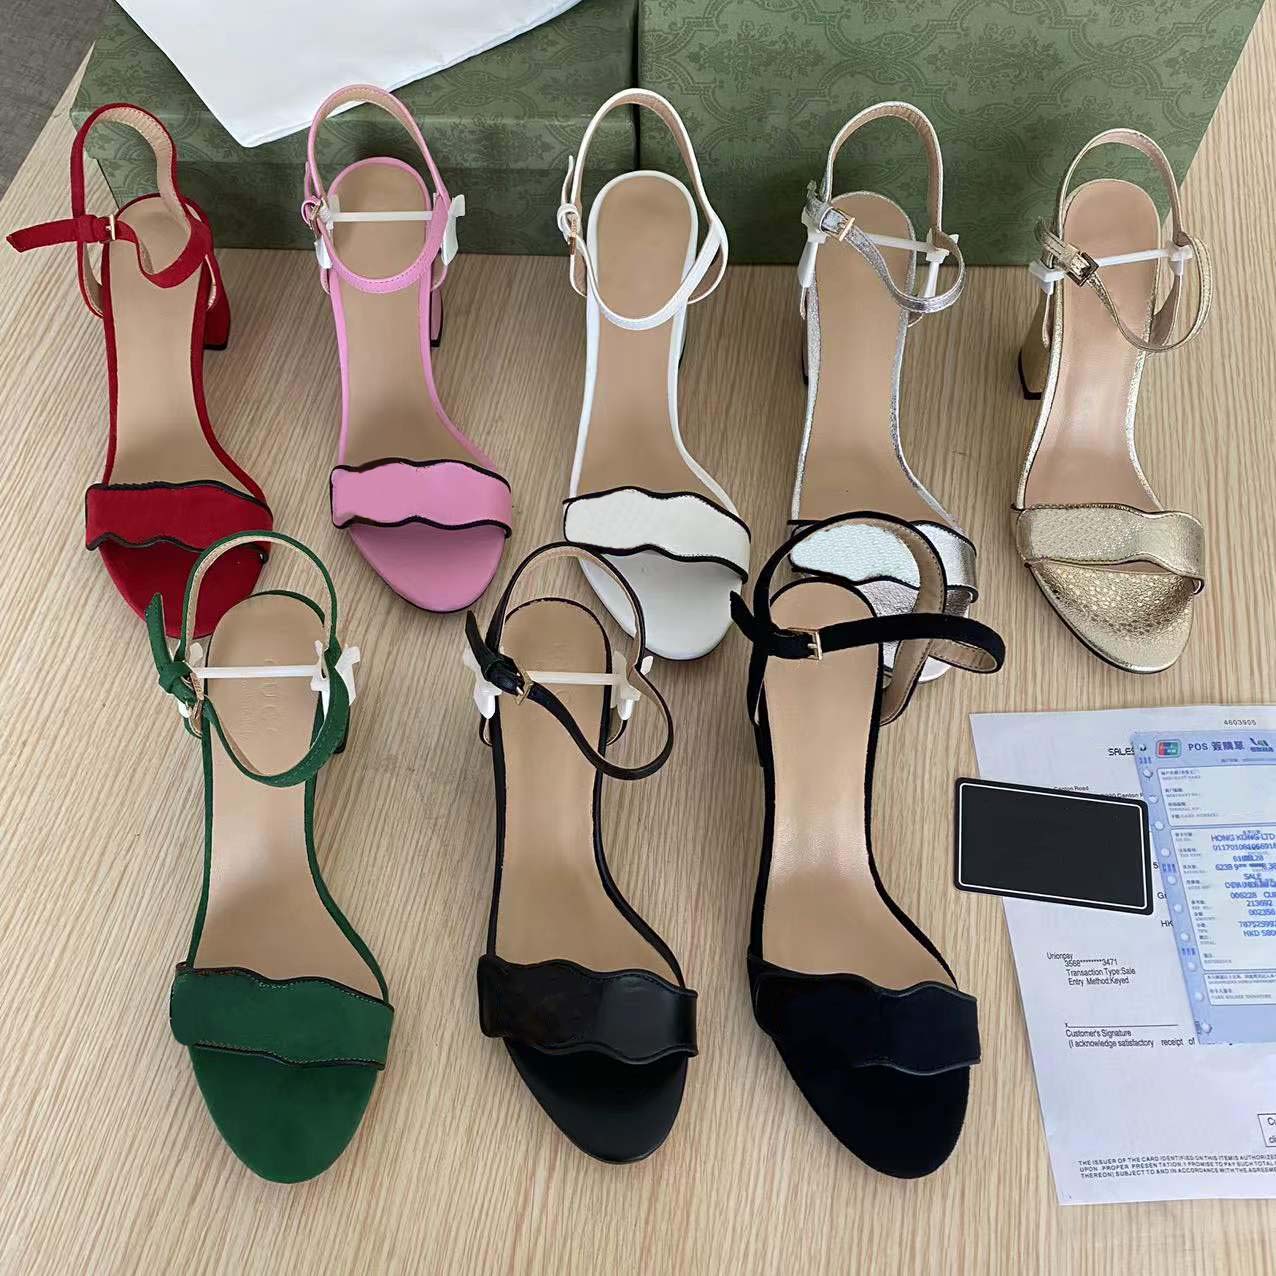 Hottest Heels With Box Women shoes Designer Sandals Quality Sandals Heel height 7cm and 5cm Sandal Flat shoe Slides Slippers by shoe10 01